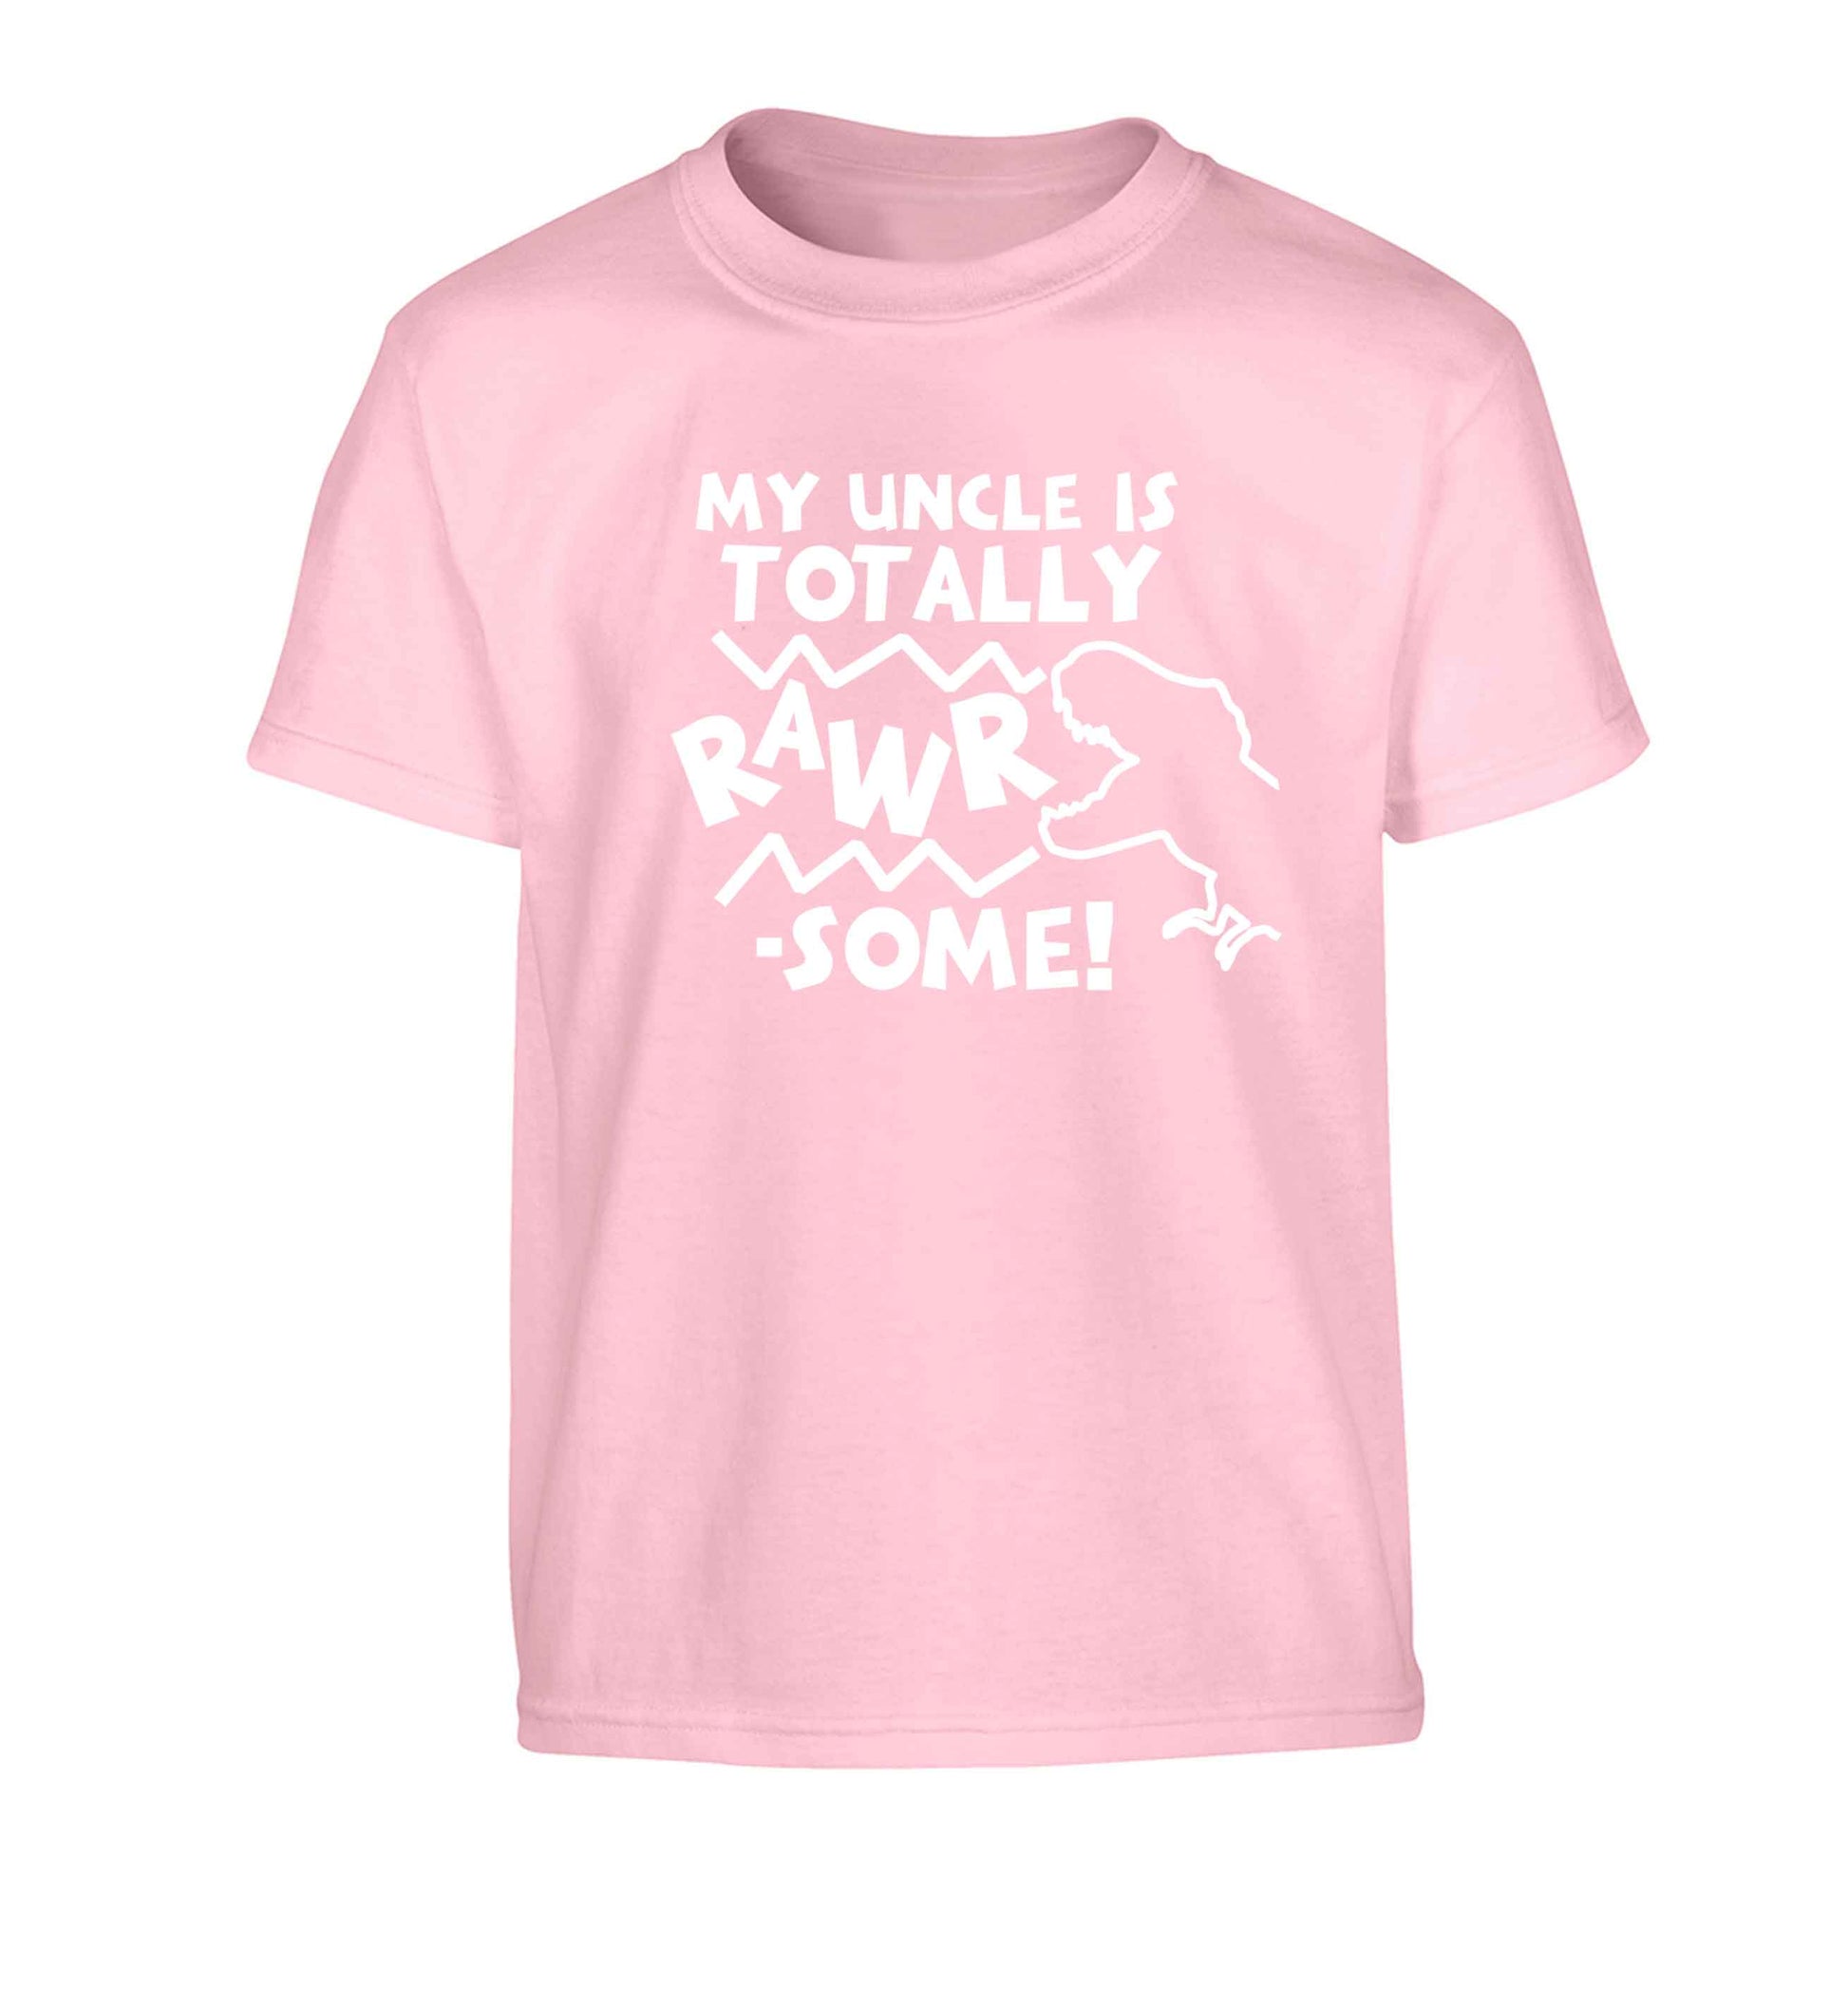 My uncle is totally rawrsome Children's light pink Tshirt 12-13 Years